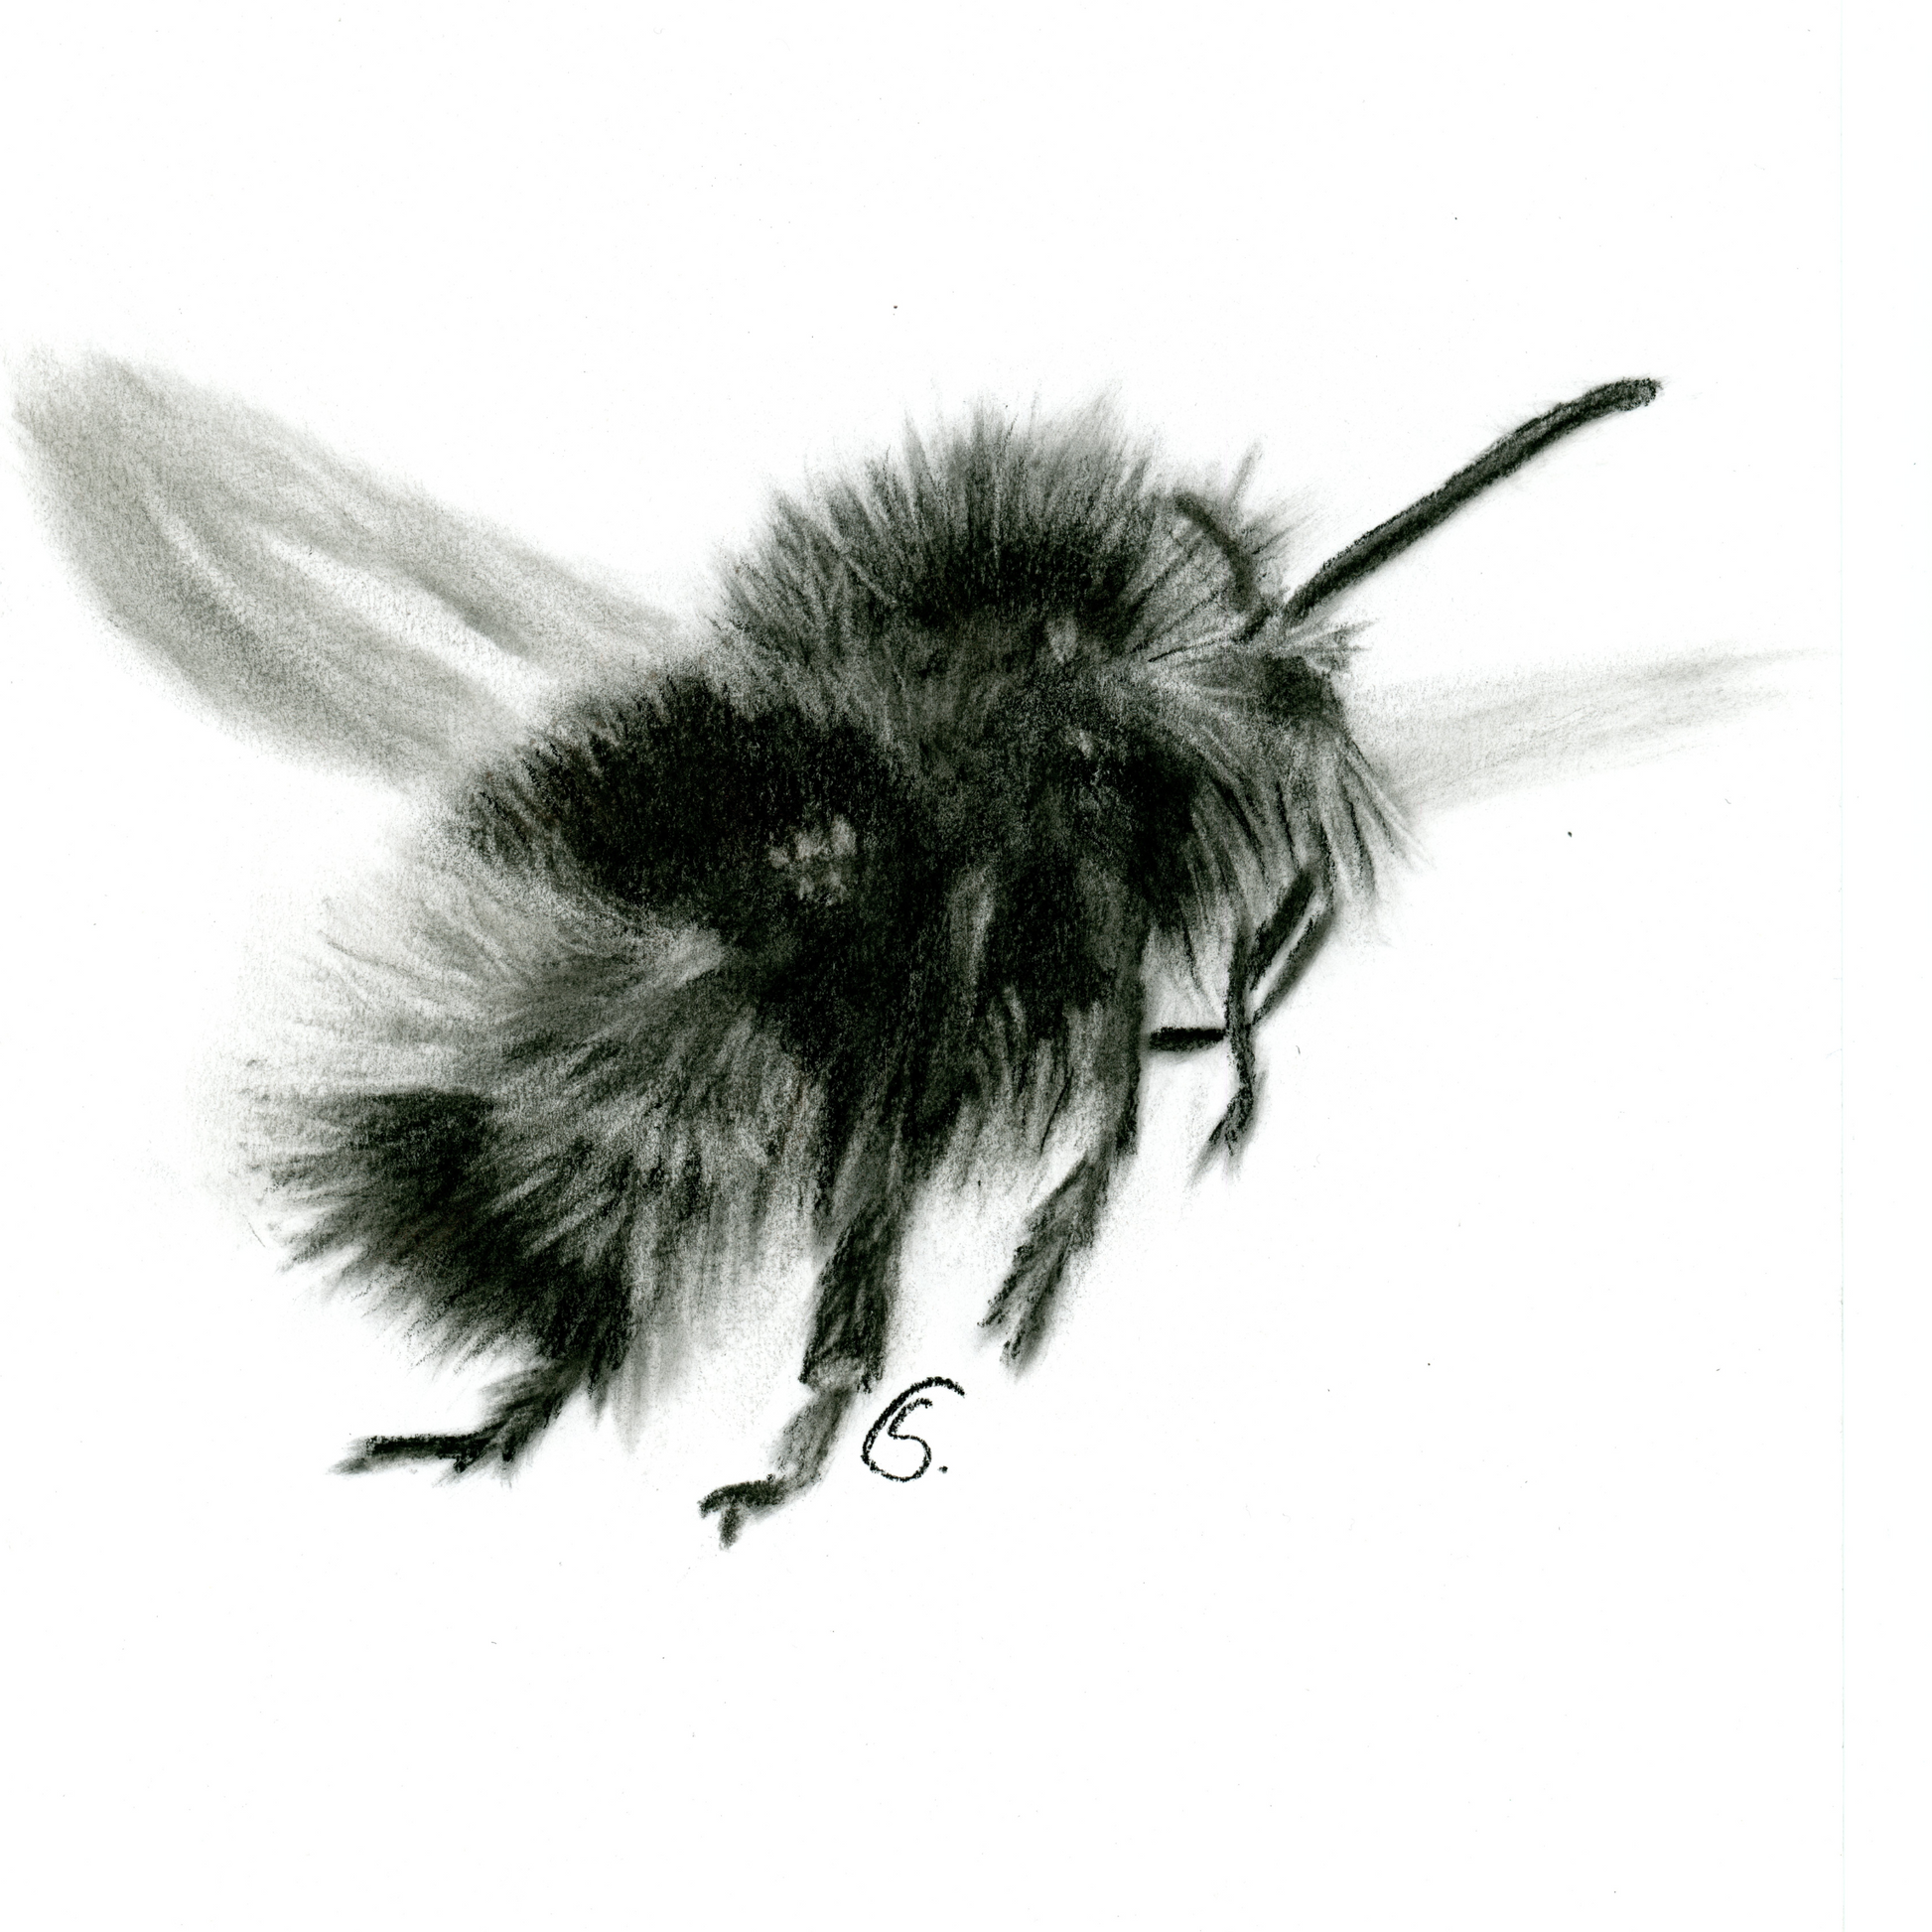 "Close-up of 'Bumblebee Serenity,' a captivating charcoal drawing by The Divine Ginger. The bumblebee takes center stage, its delicate details and serene presence beautifully captured on textured paper."